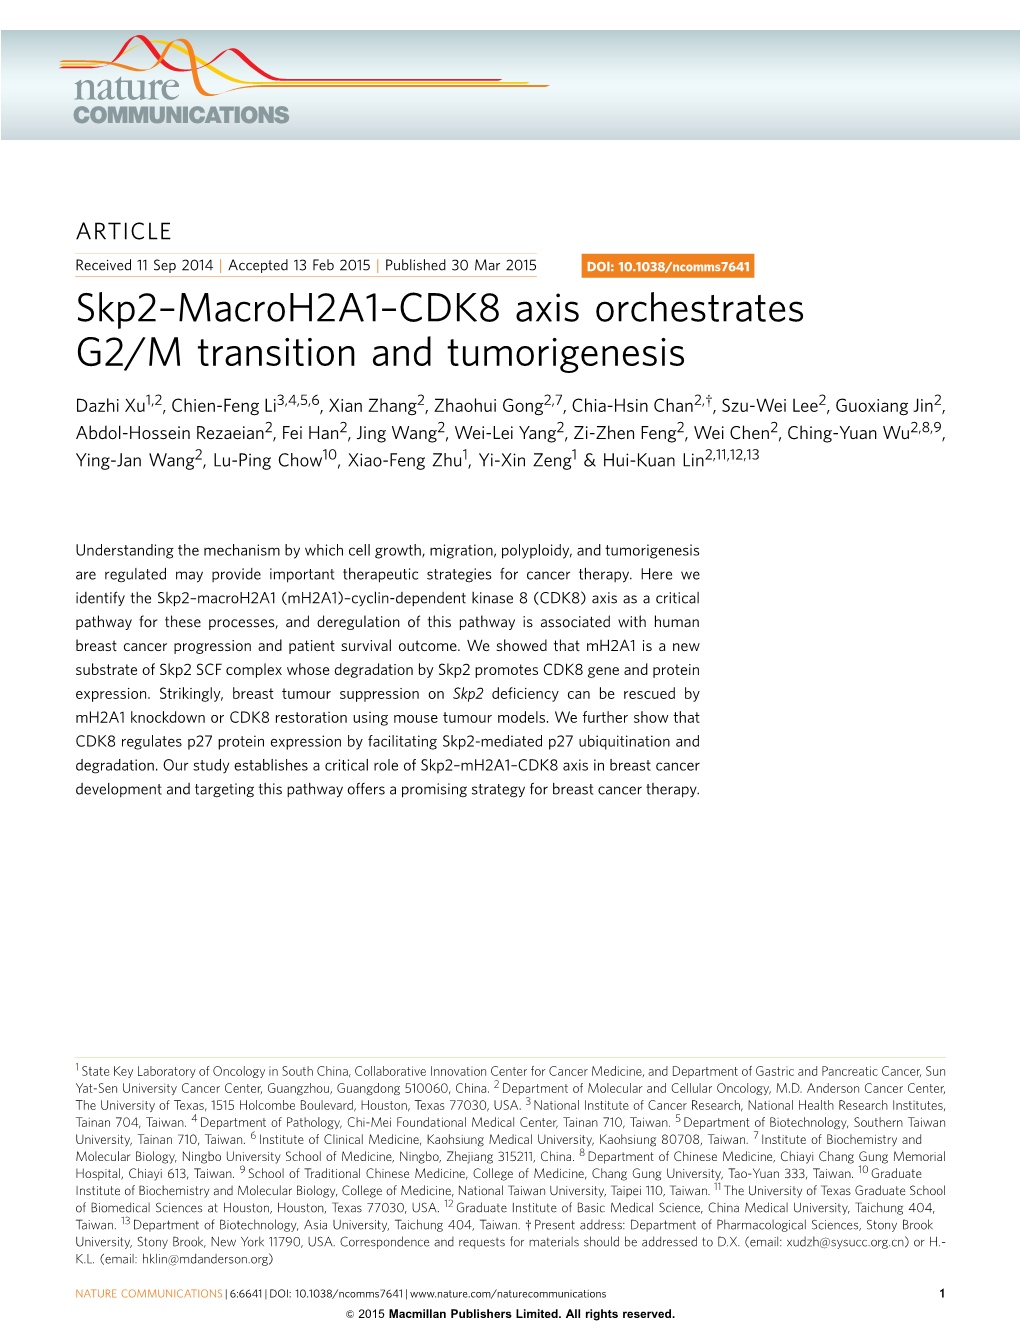 CDK8 Axis Orchestrates G2/M Transition and Tumorigenesis